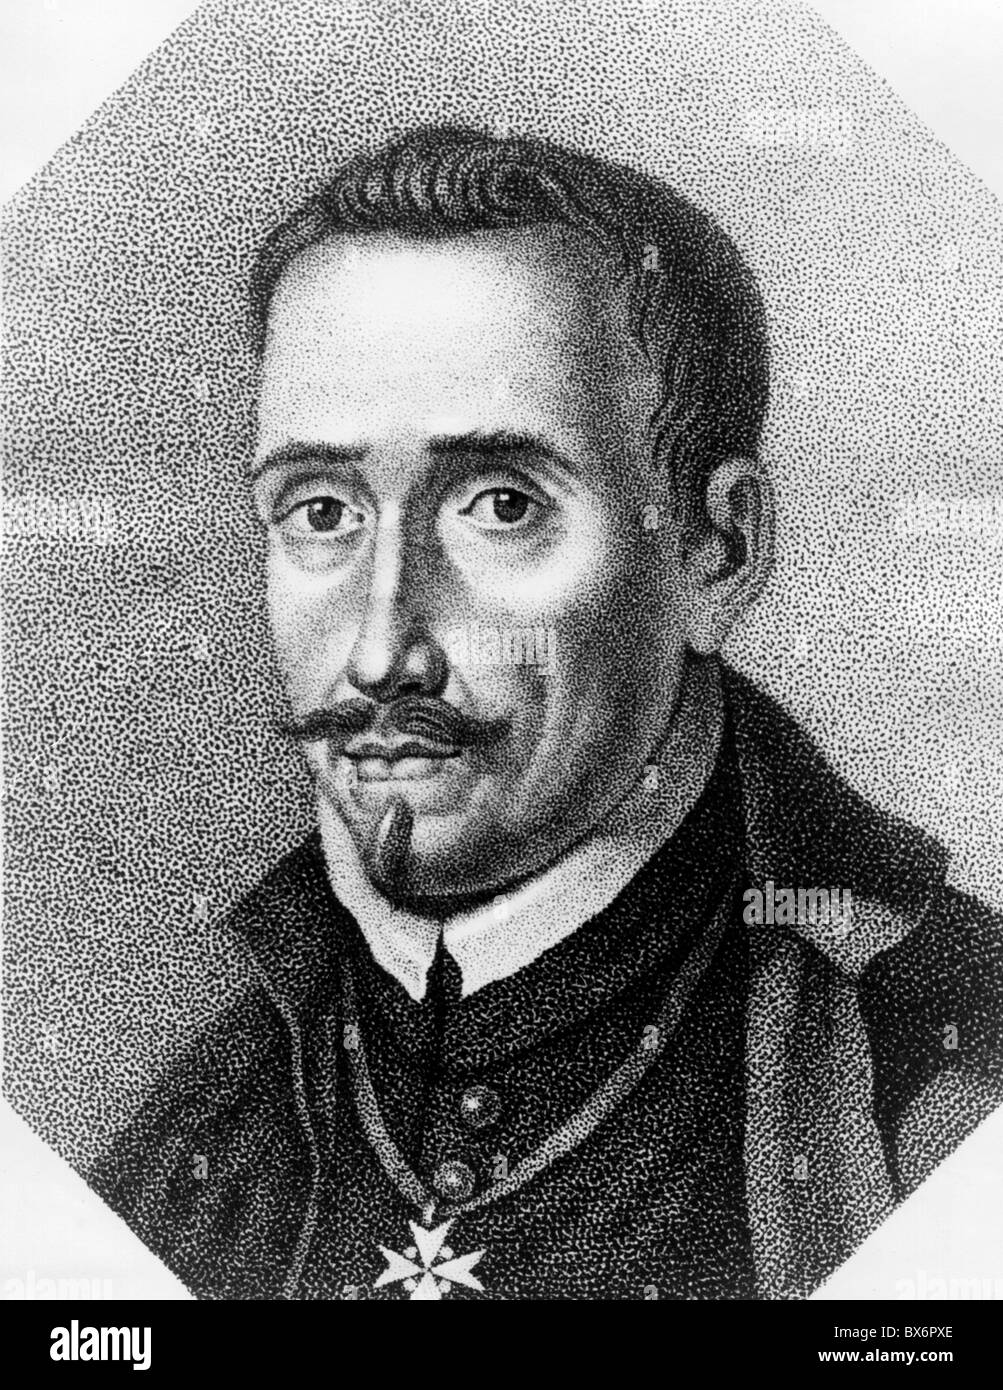 Vega y Carpio, Felix Lope de, 25.11.1562 - 27.8.1635, Spanish poet, portrait, engraving by Christian Zschoch (1775 - 1833), after a contemporary painting, Artist's Copyright has not to be cleared Stock Photo